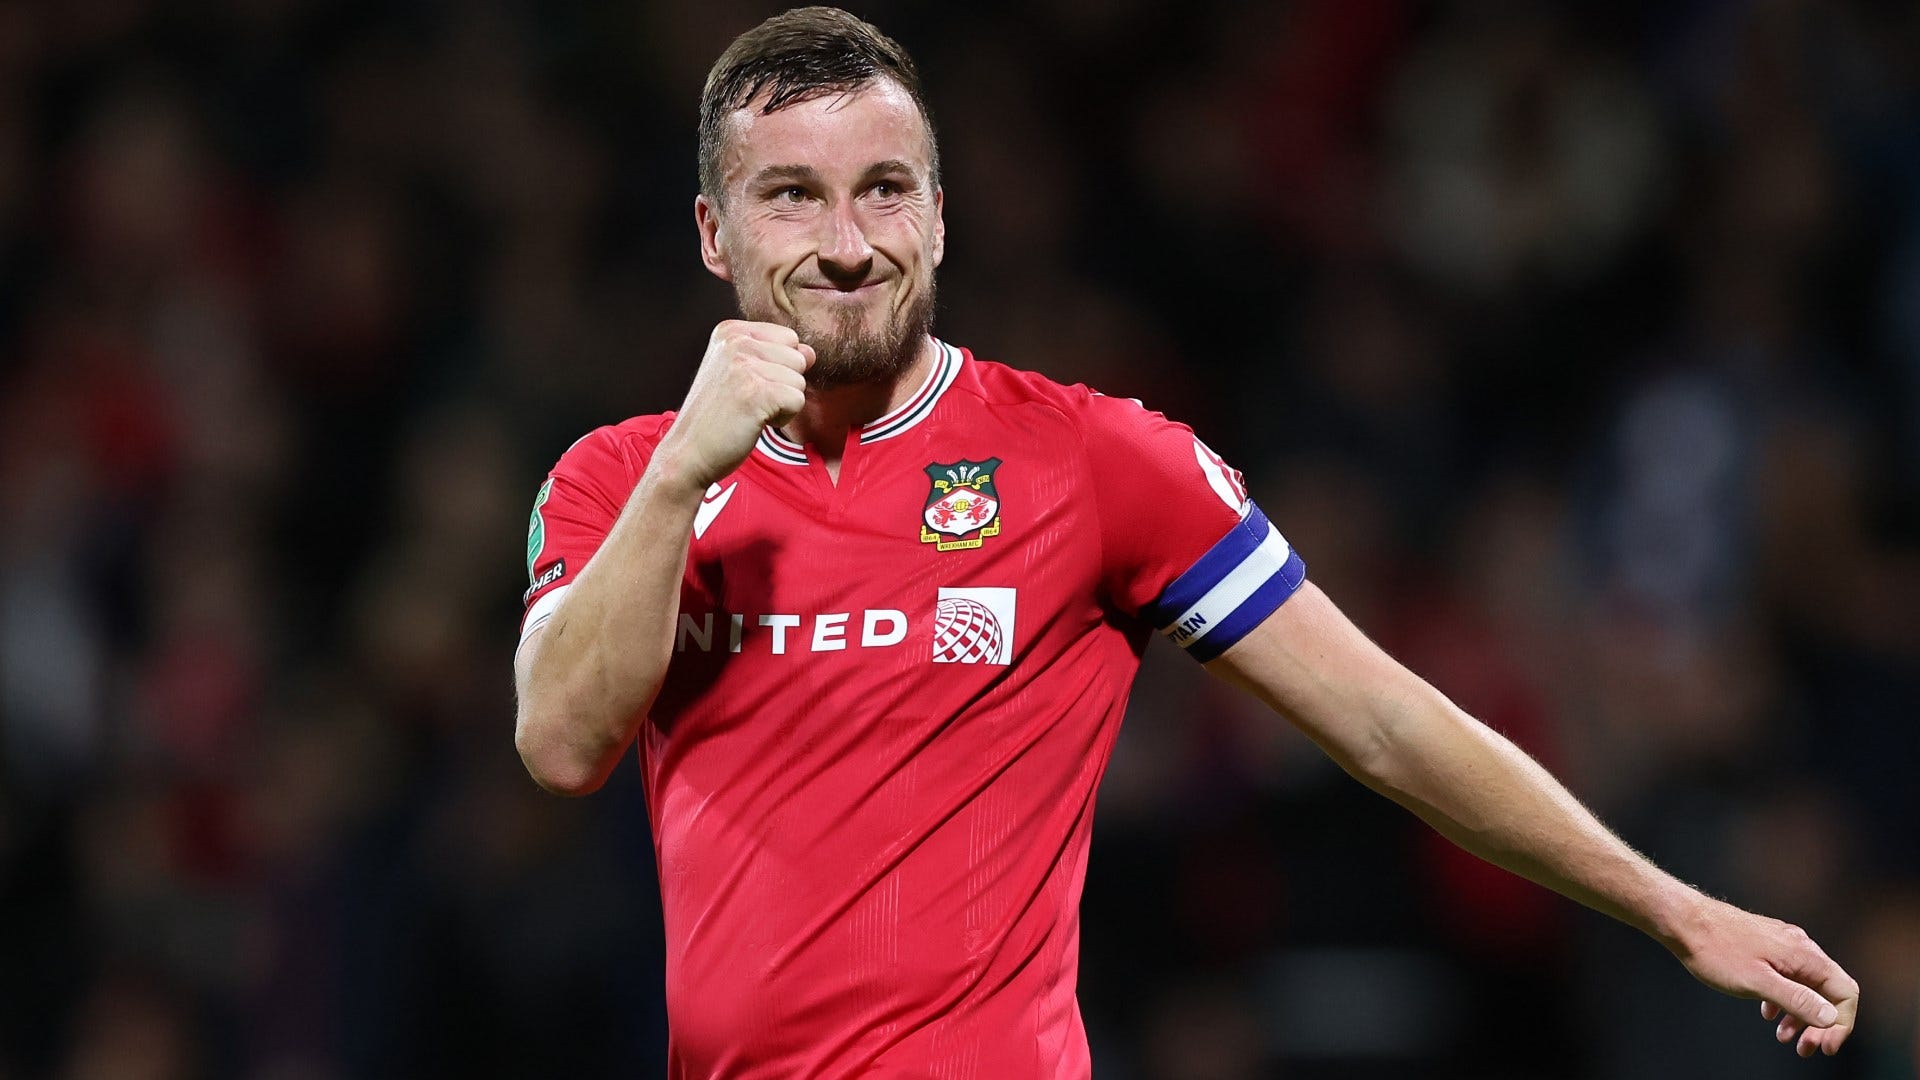 Wrexham vs Swindon Live stream, TV channel, kick-off time and where to watch Goal US